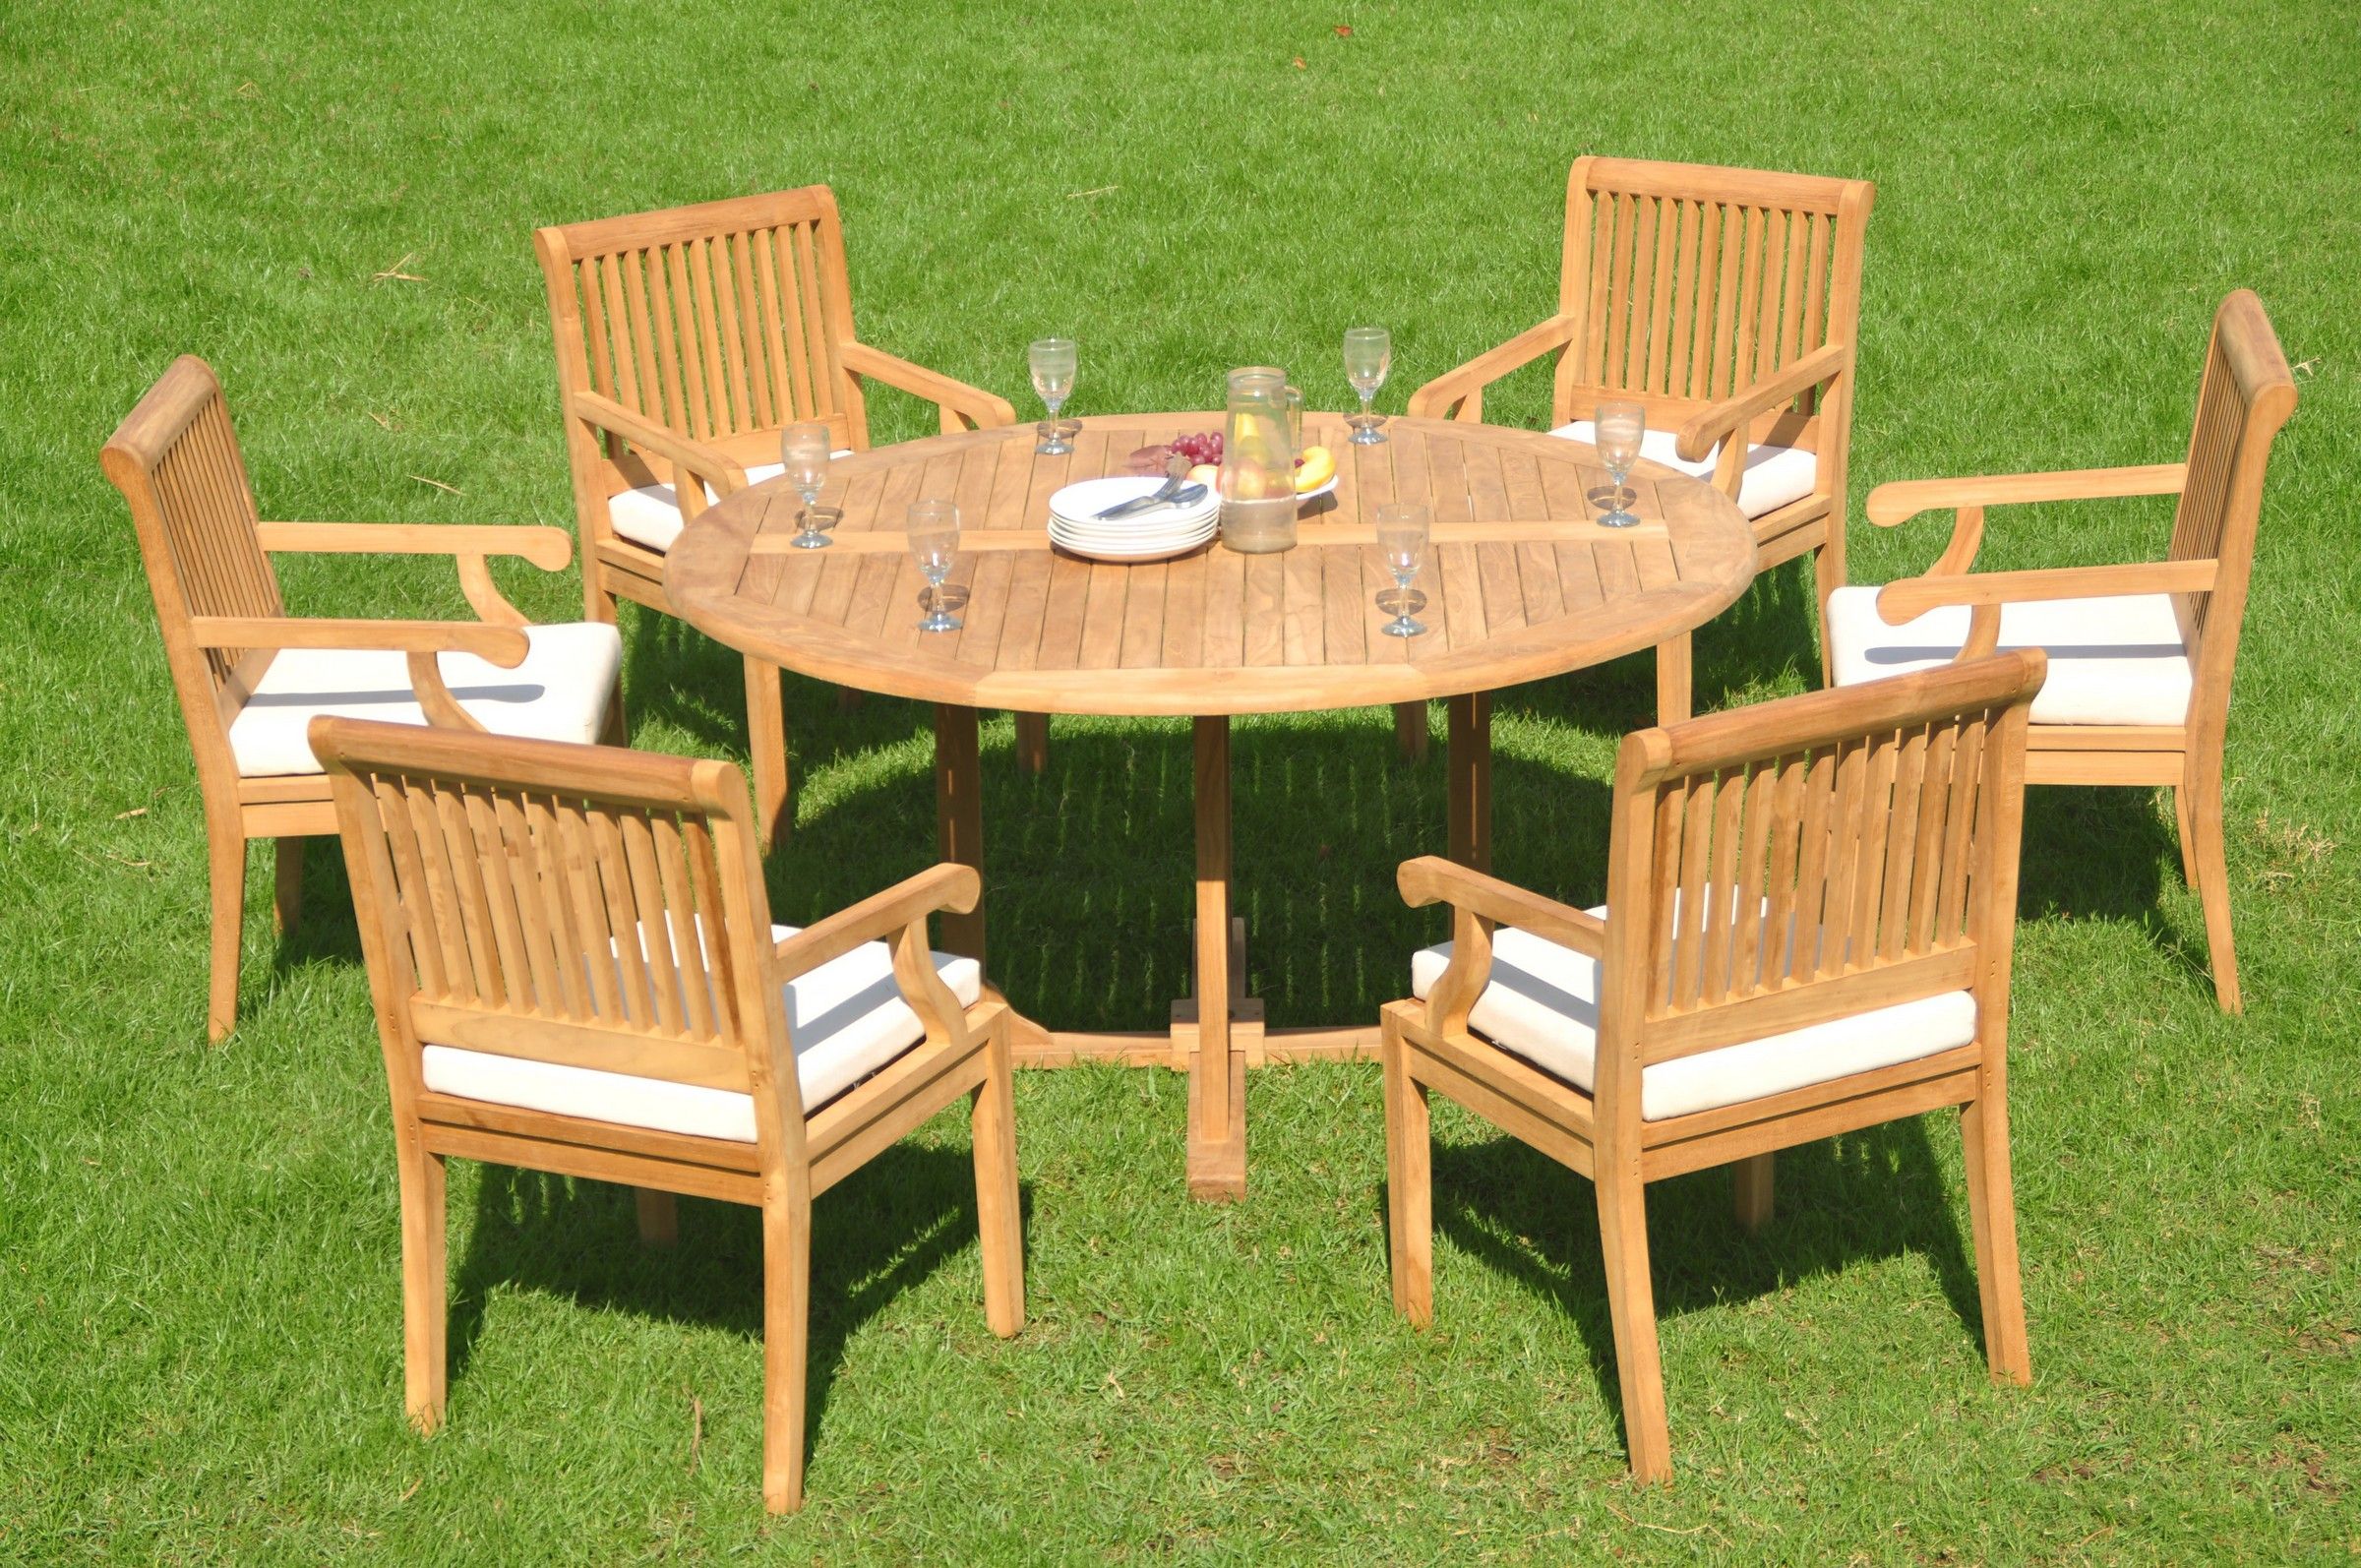 Teak Dining Set:6 Seater 7 Pc – 60" Round Table And 6 Sack Arm Chairs Inside Teak Outdoor Loungers Sets (View 7 of 15)